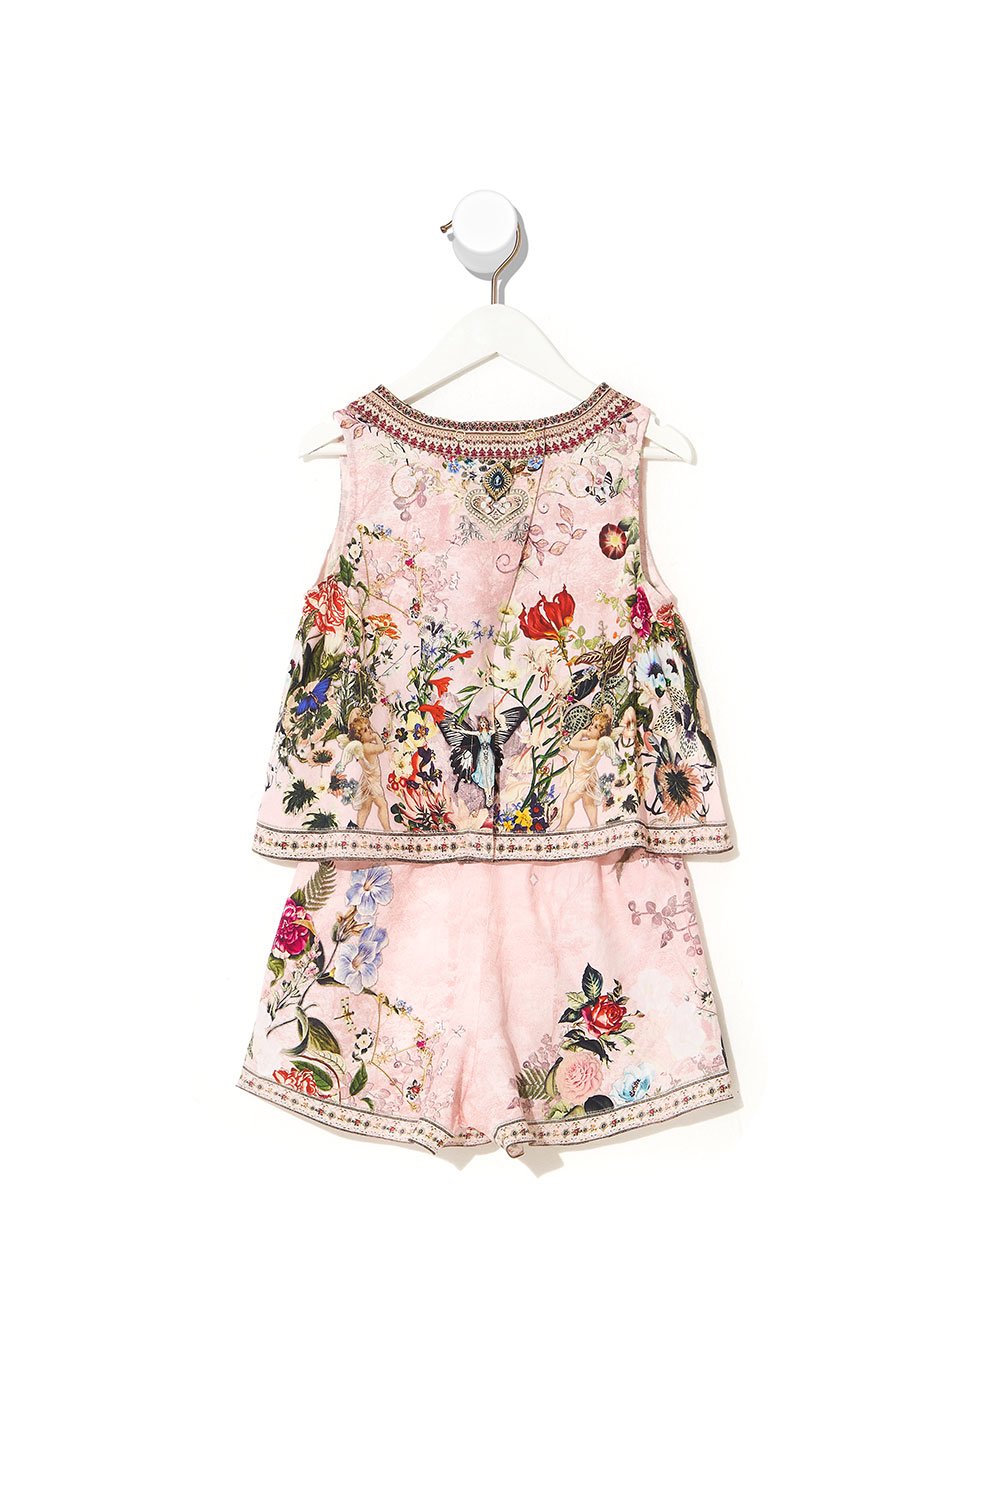 KIDS DOUBLE LAYER PLAYSUIT 4-10 YOUNG HEARTS